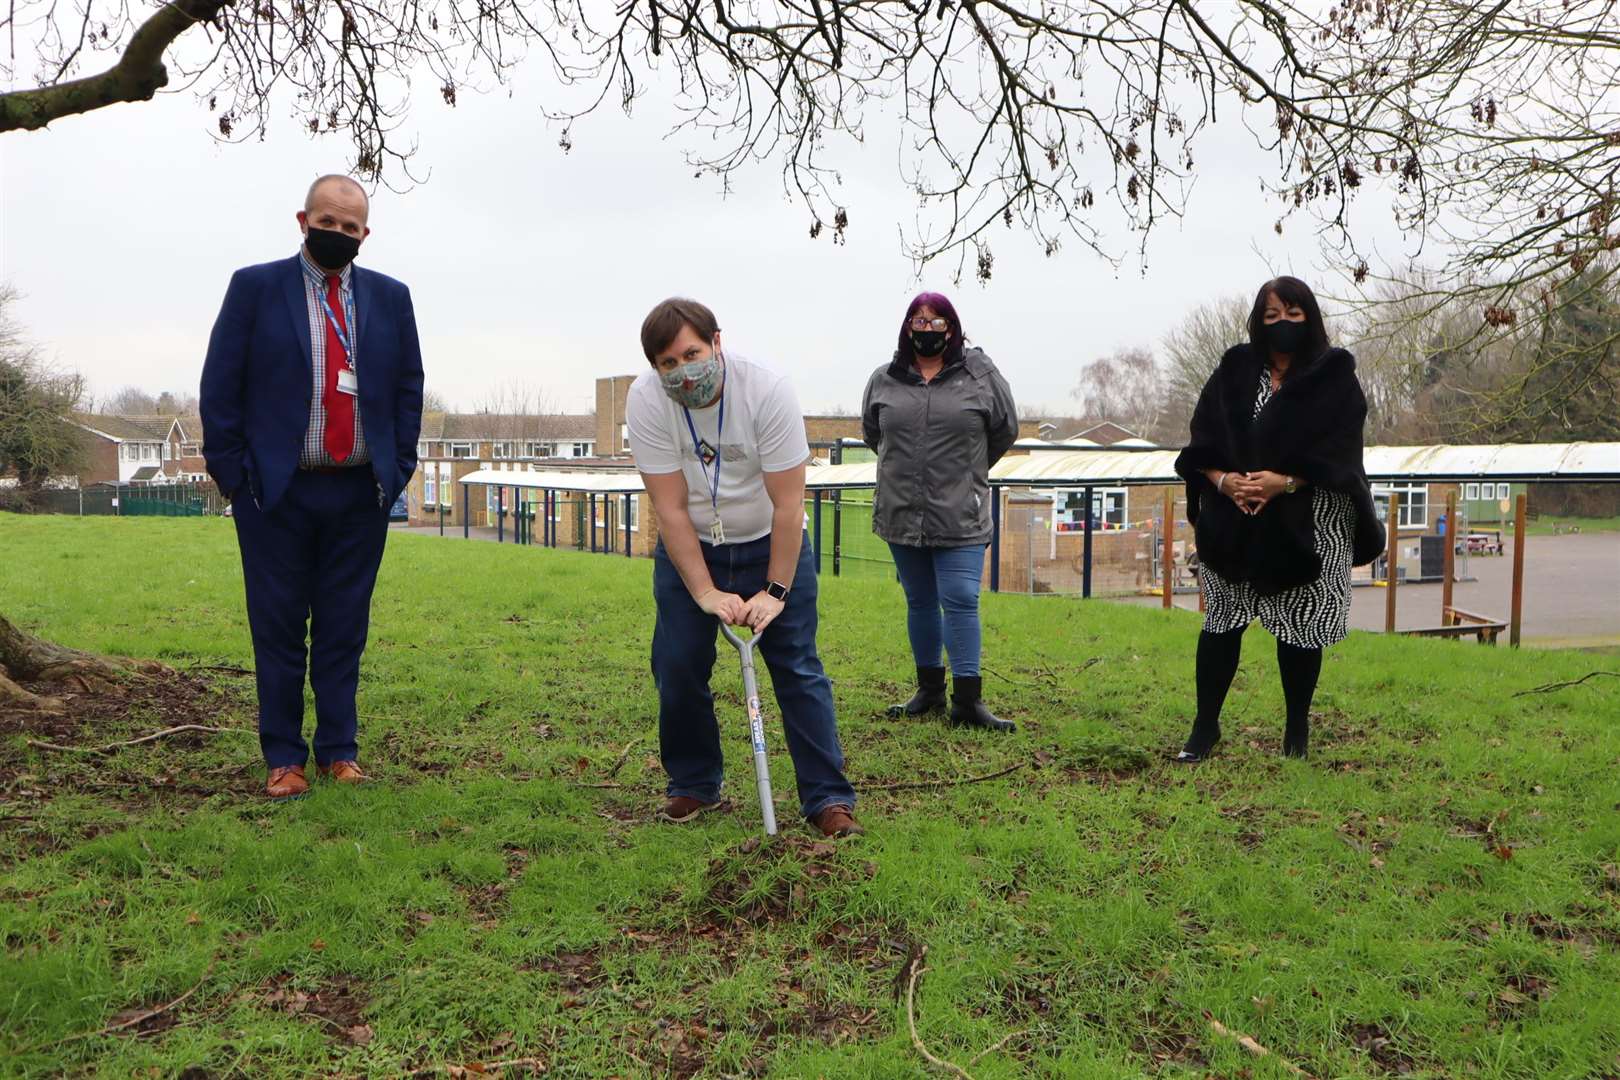 Sunny Bank head of school Darren Waters digging a hole for a time capsule at Murston with, from the left, Ryan Driver, Sarah Riggs and Debbie Wheeler